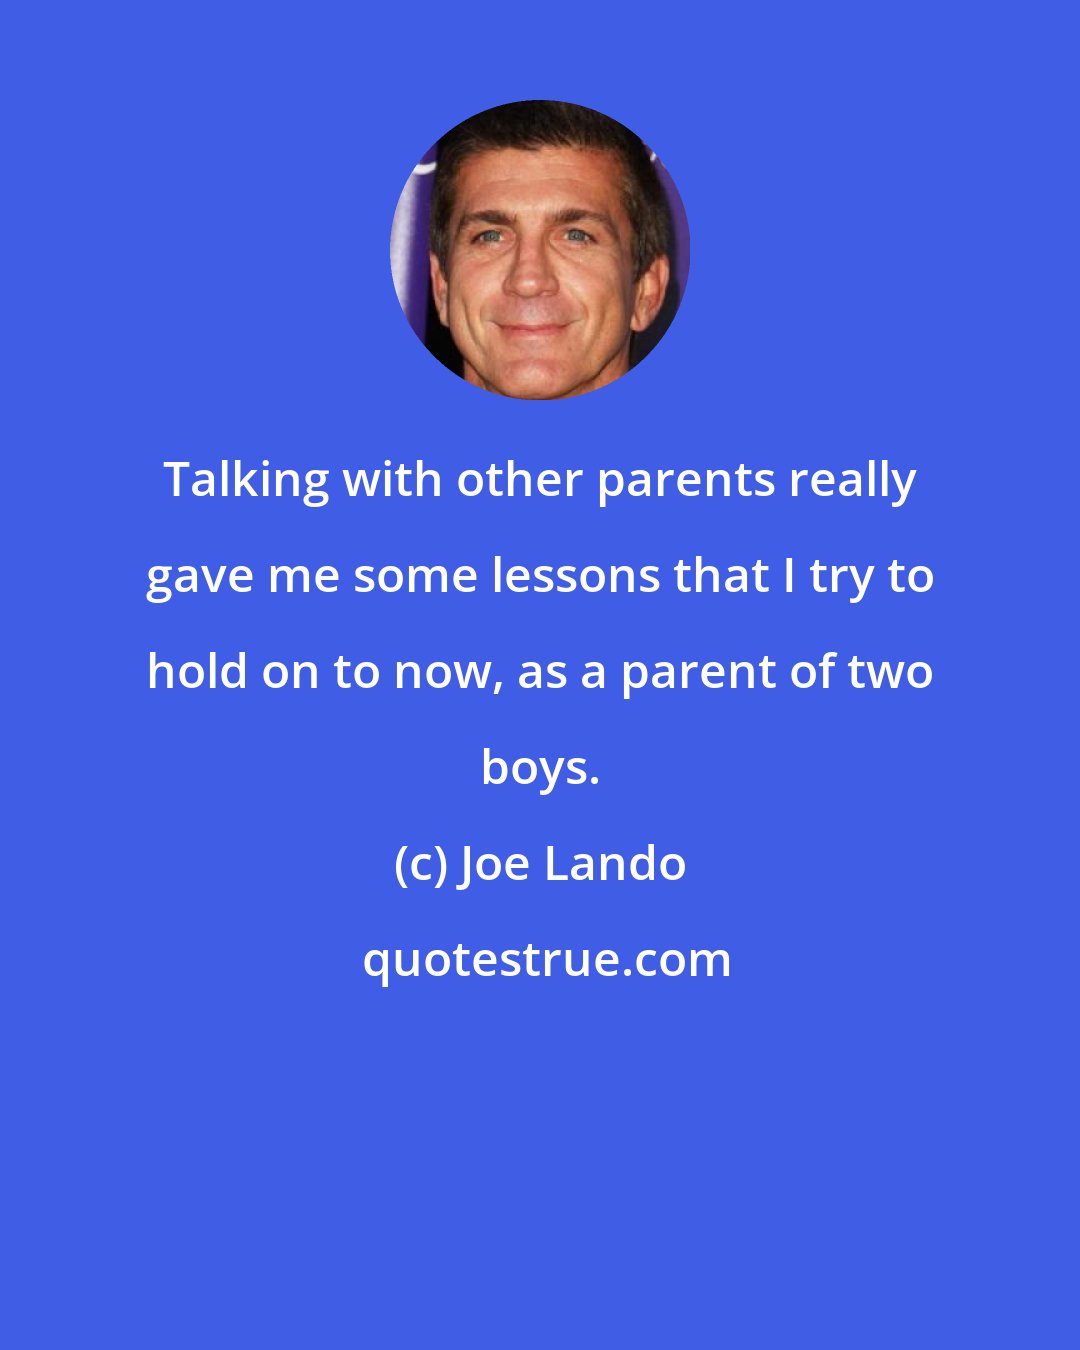 Joe Lando: Talking with other parents really gave me some lessons that I try to hold on to now, as a parent of two boys.